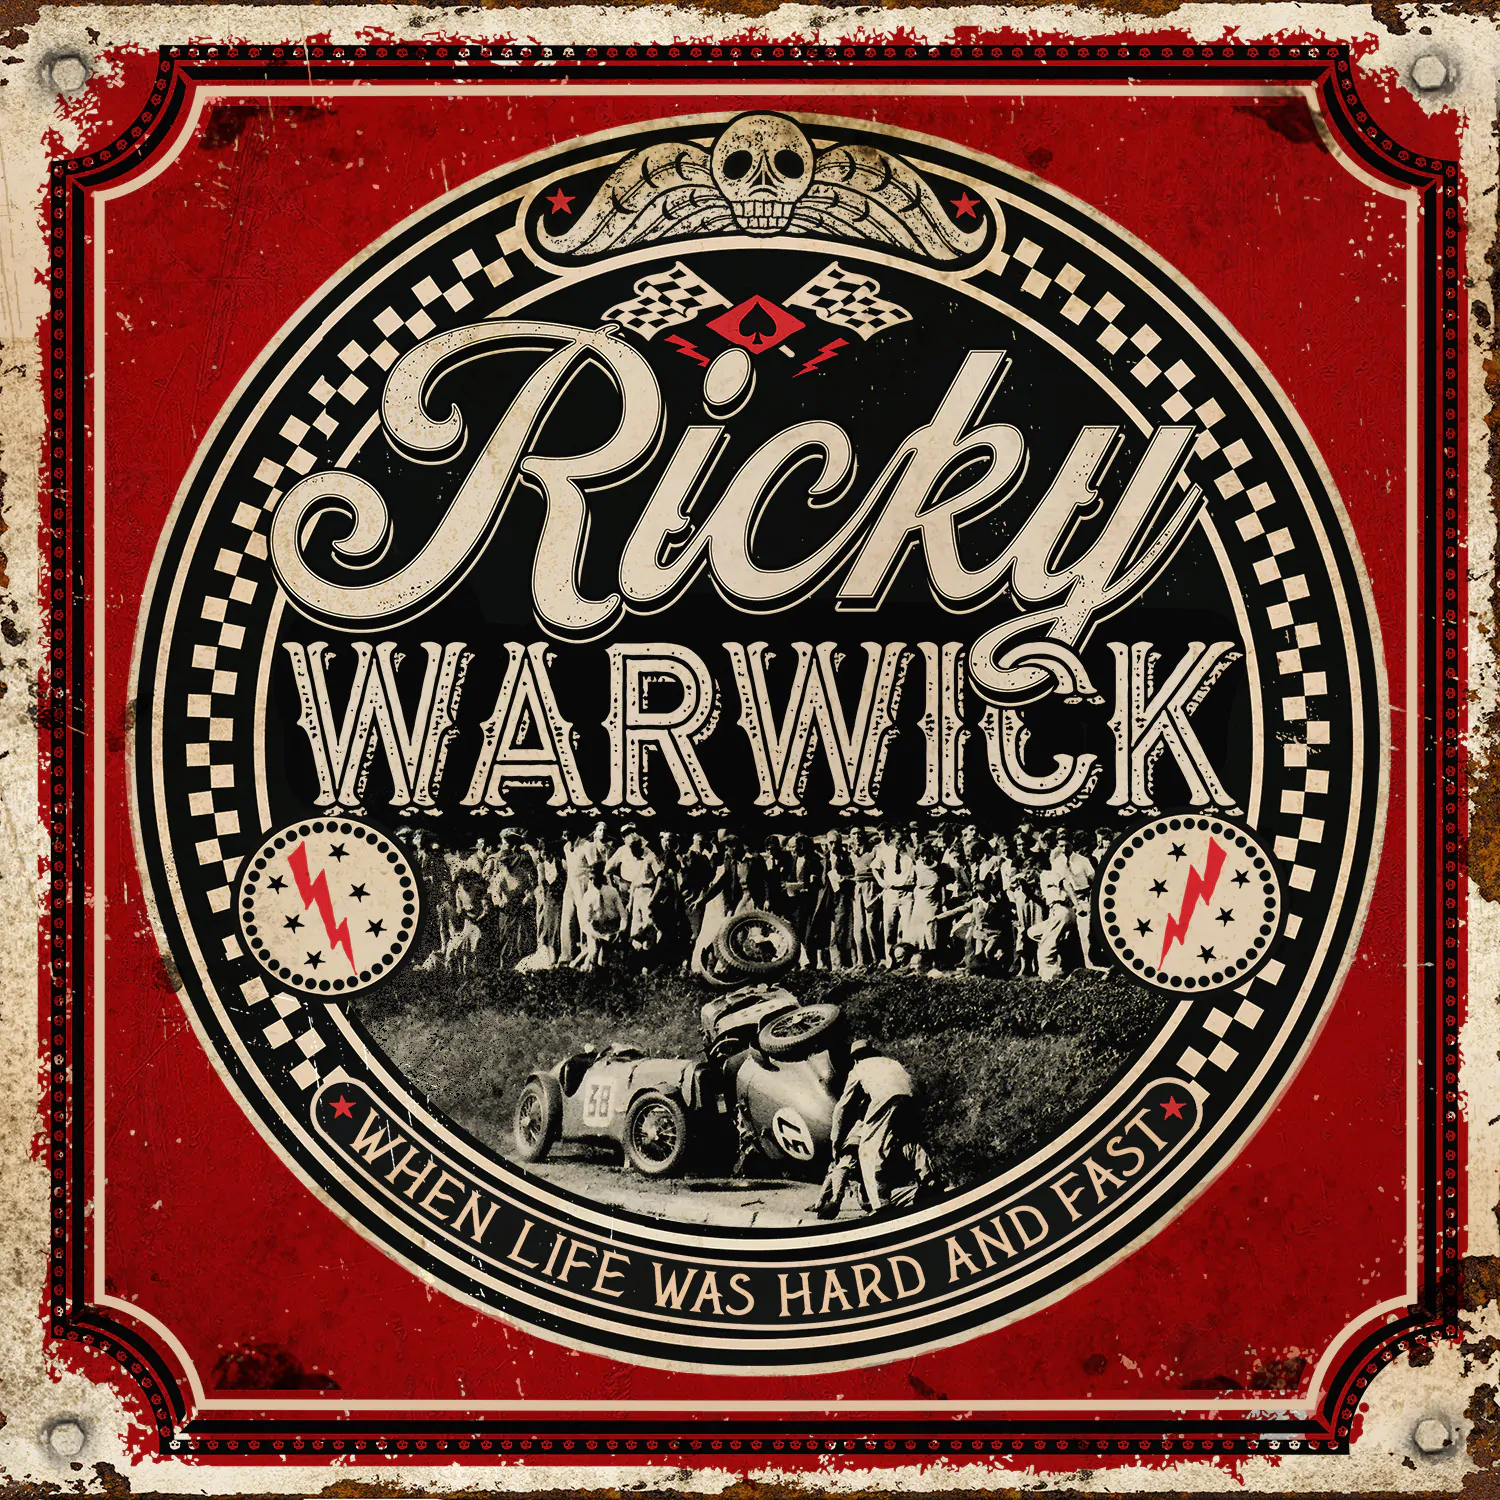 ALBUM REVIEW: Ricky Warwick – When Life Was Hard And Fast